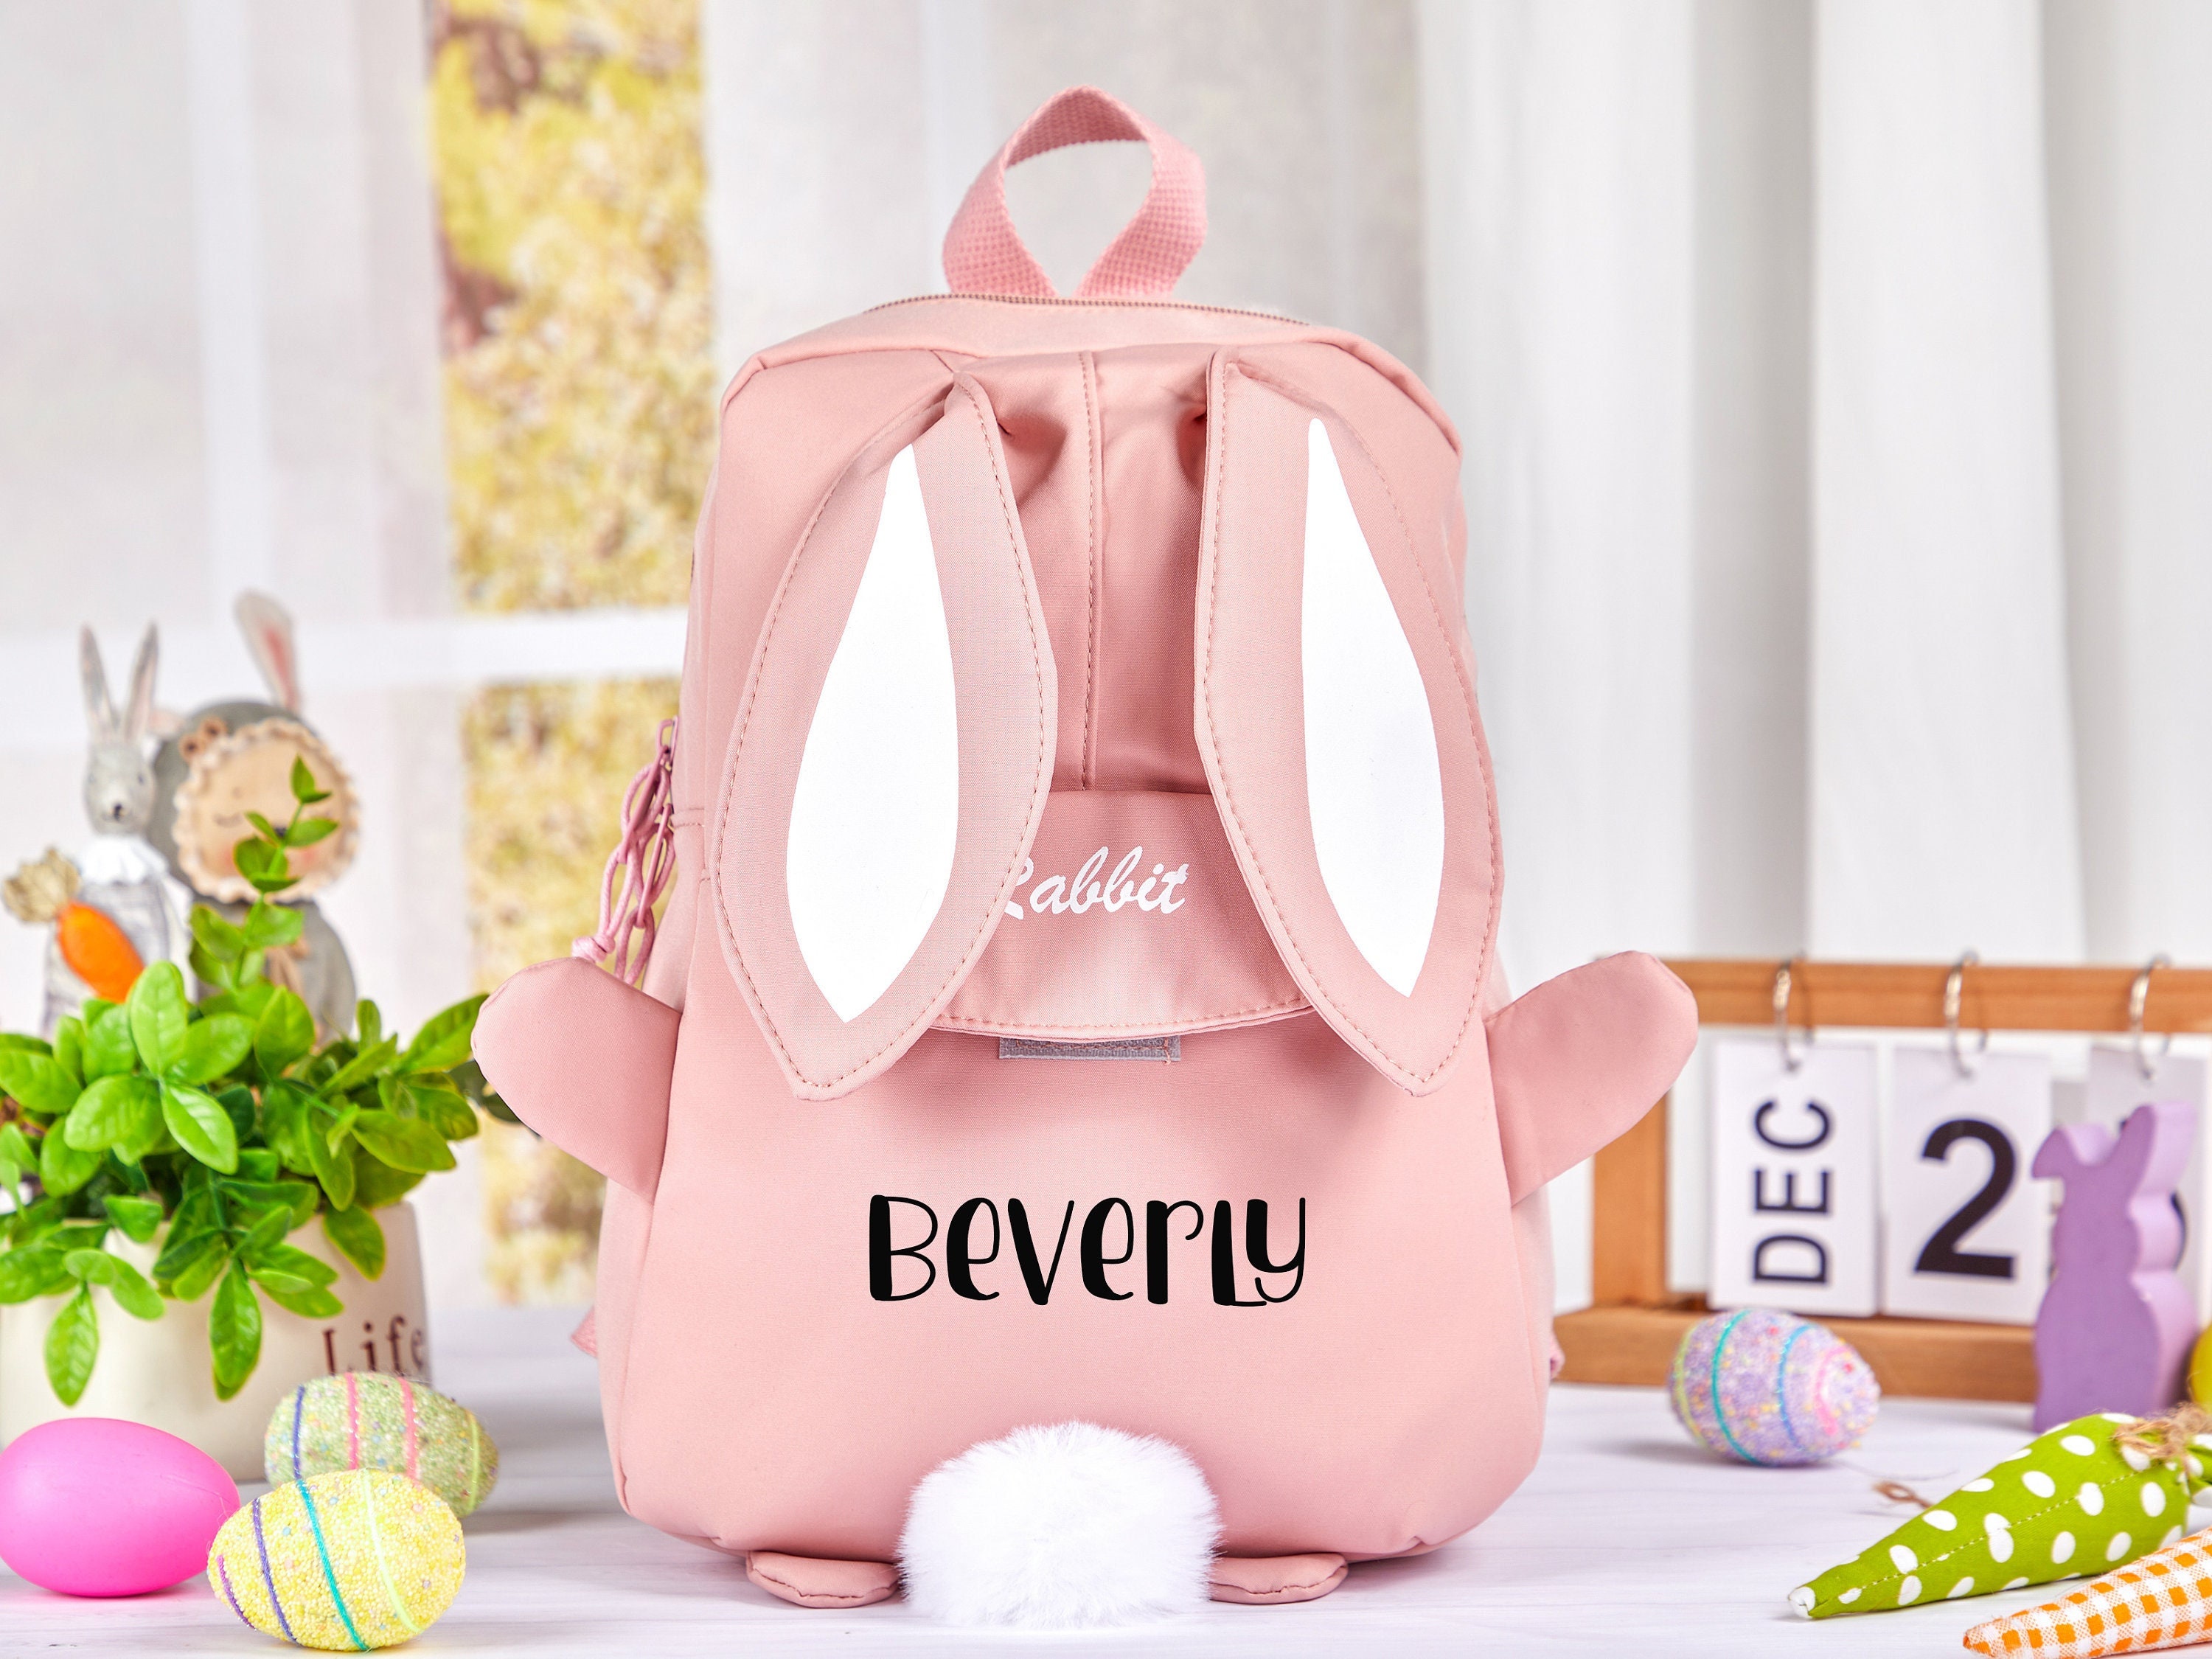 Baby Bunny Backpack - Personalized Book Bag for Girls in Pink and